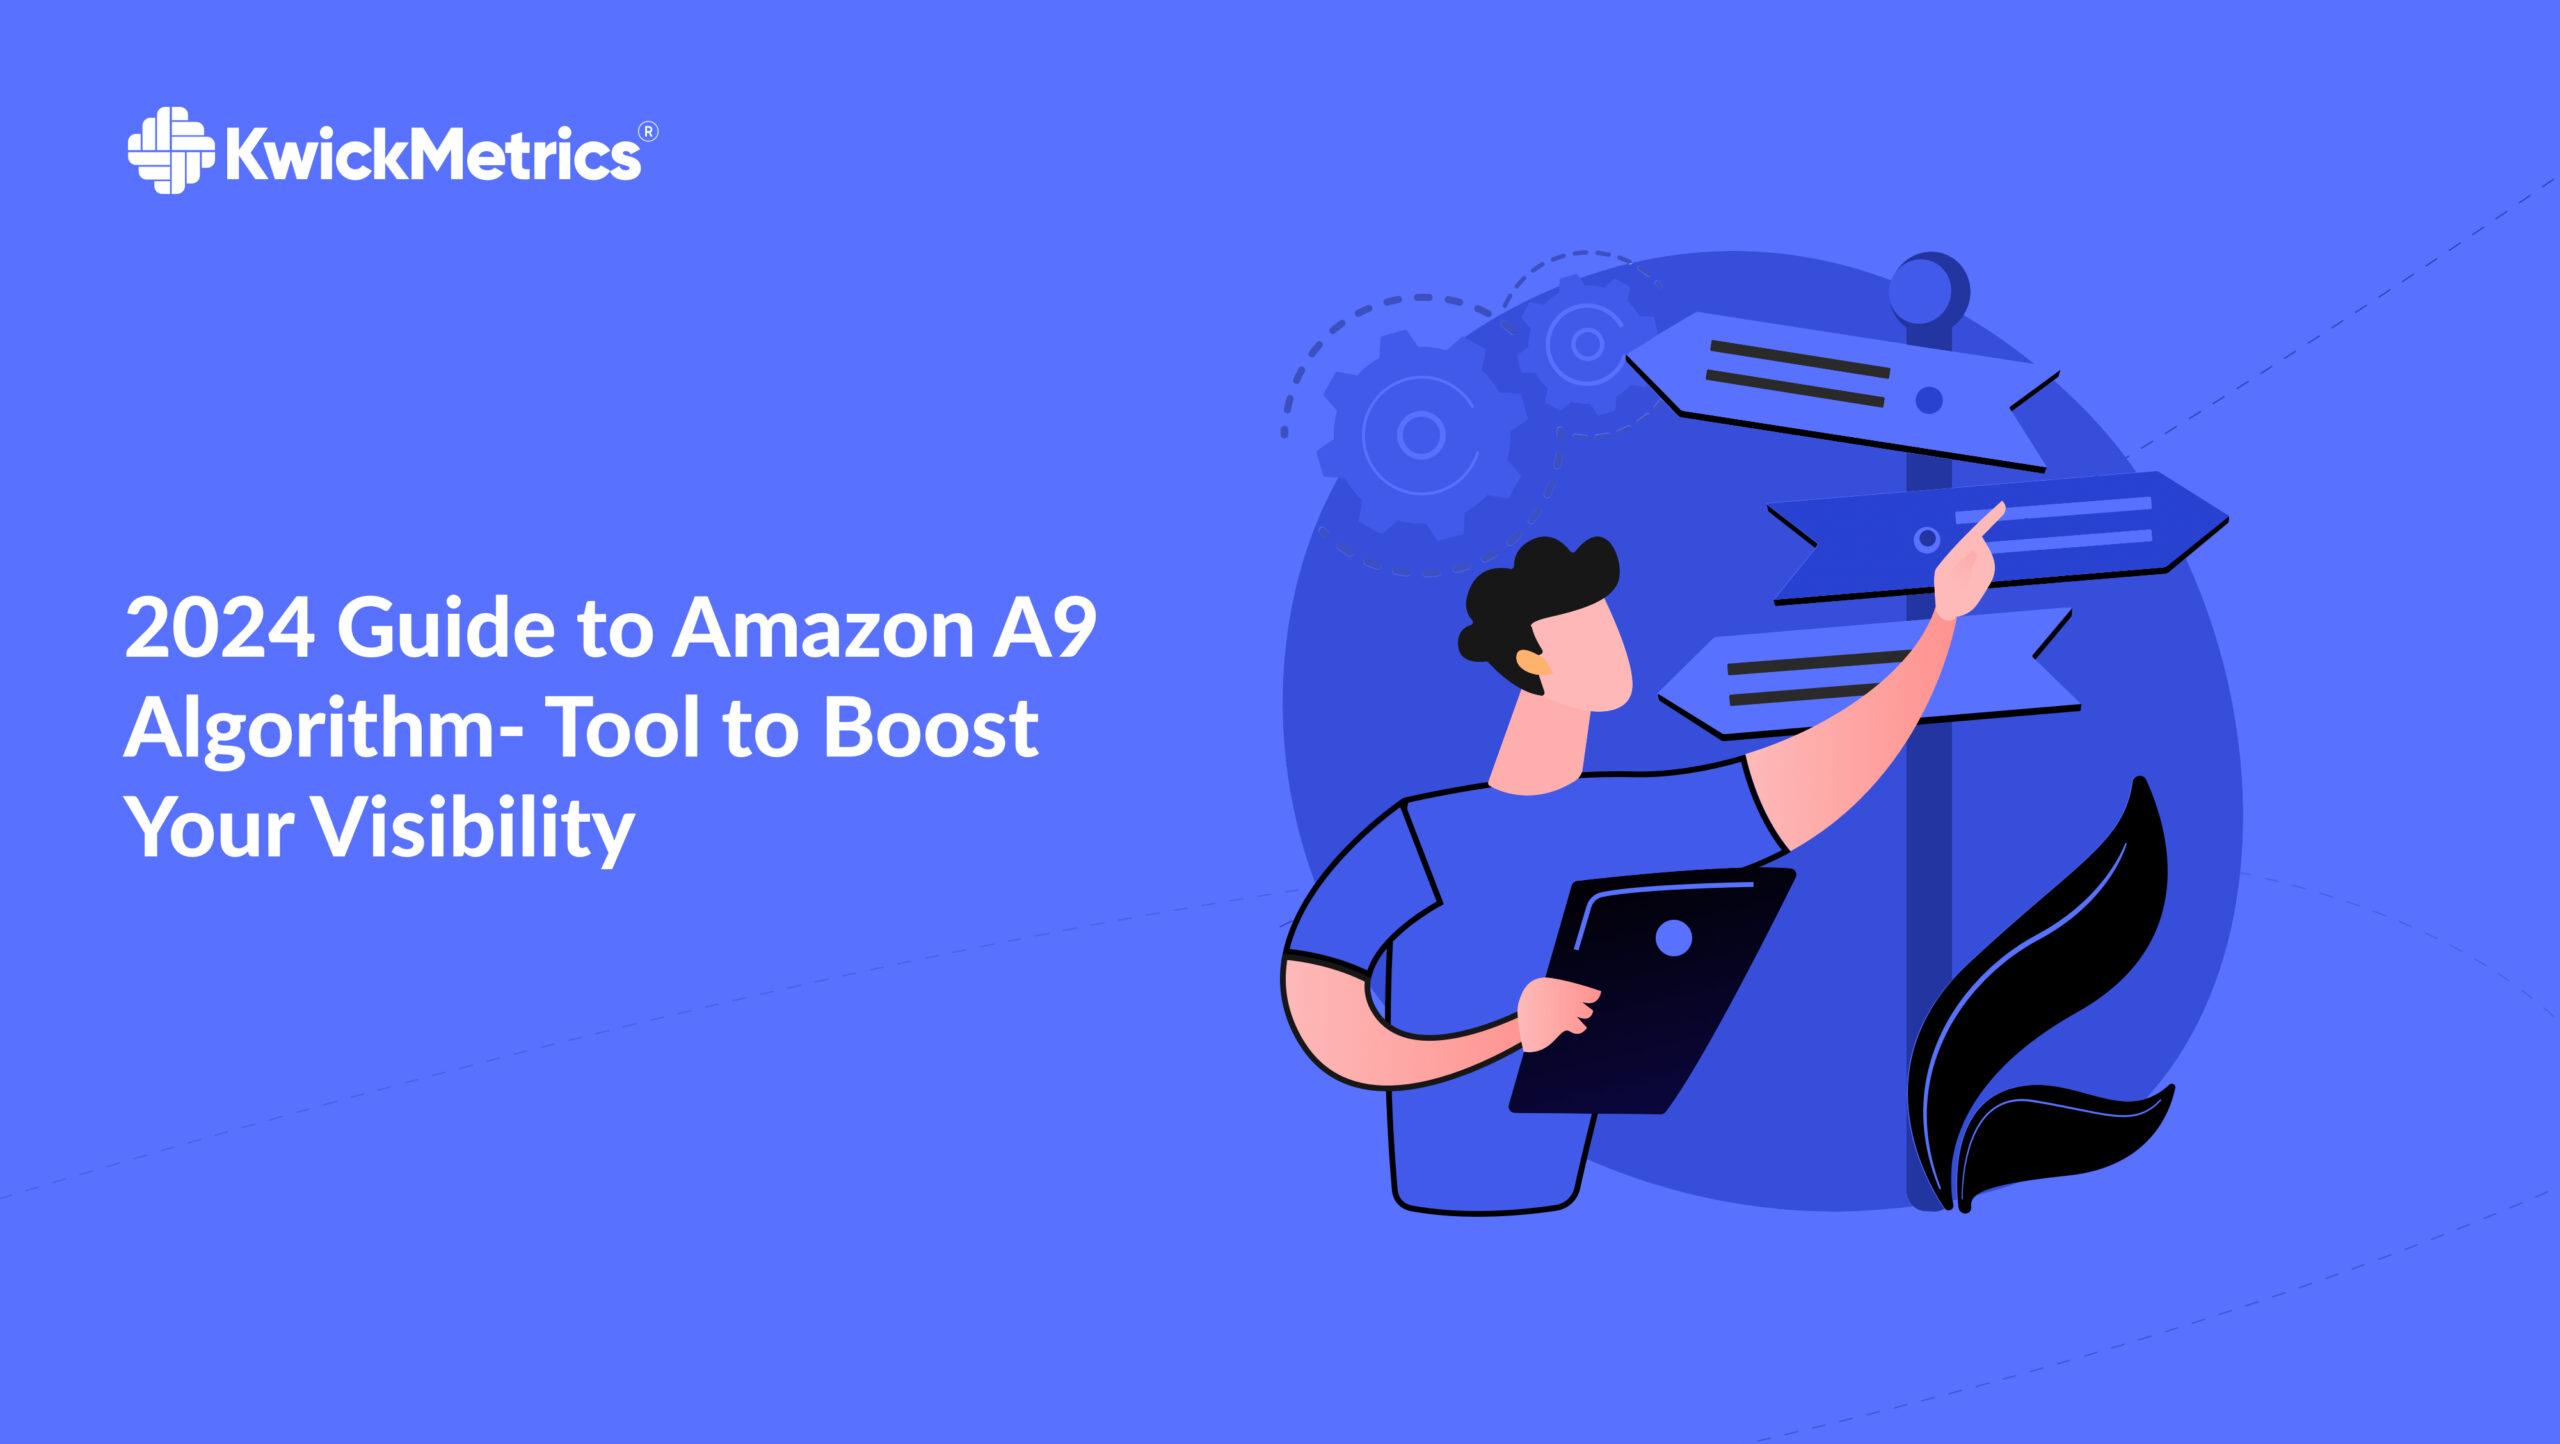 2024 Guide to Amazon A9 Algorithm- Tool to Boost Your Visibility